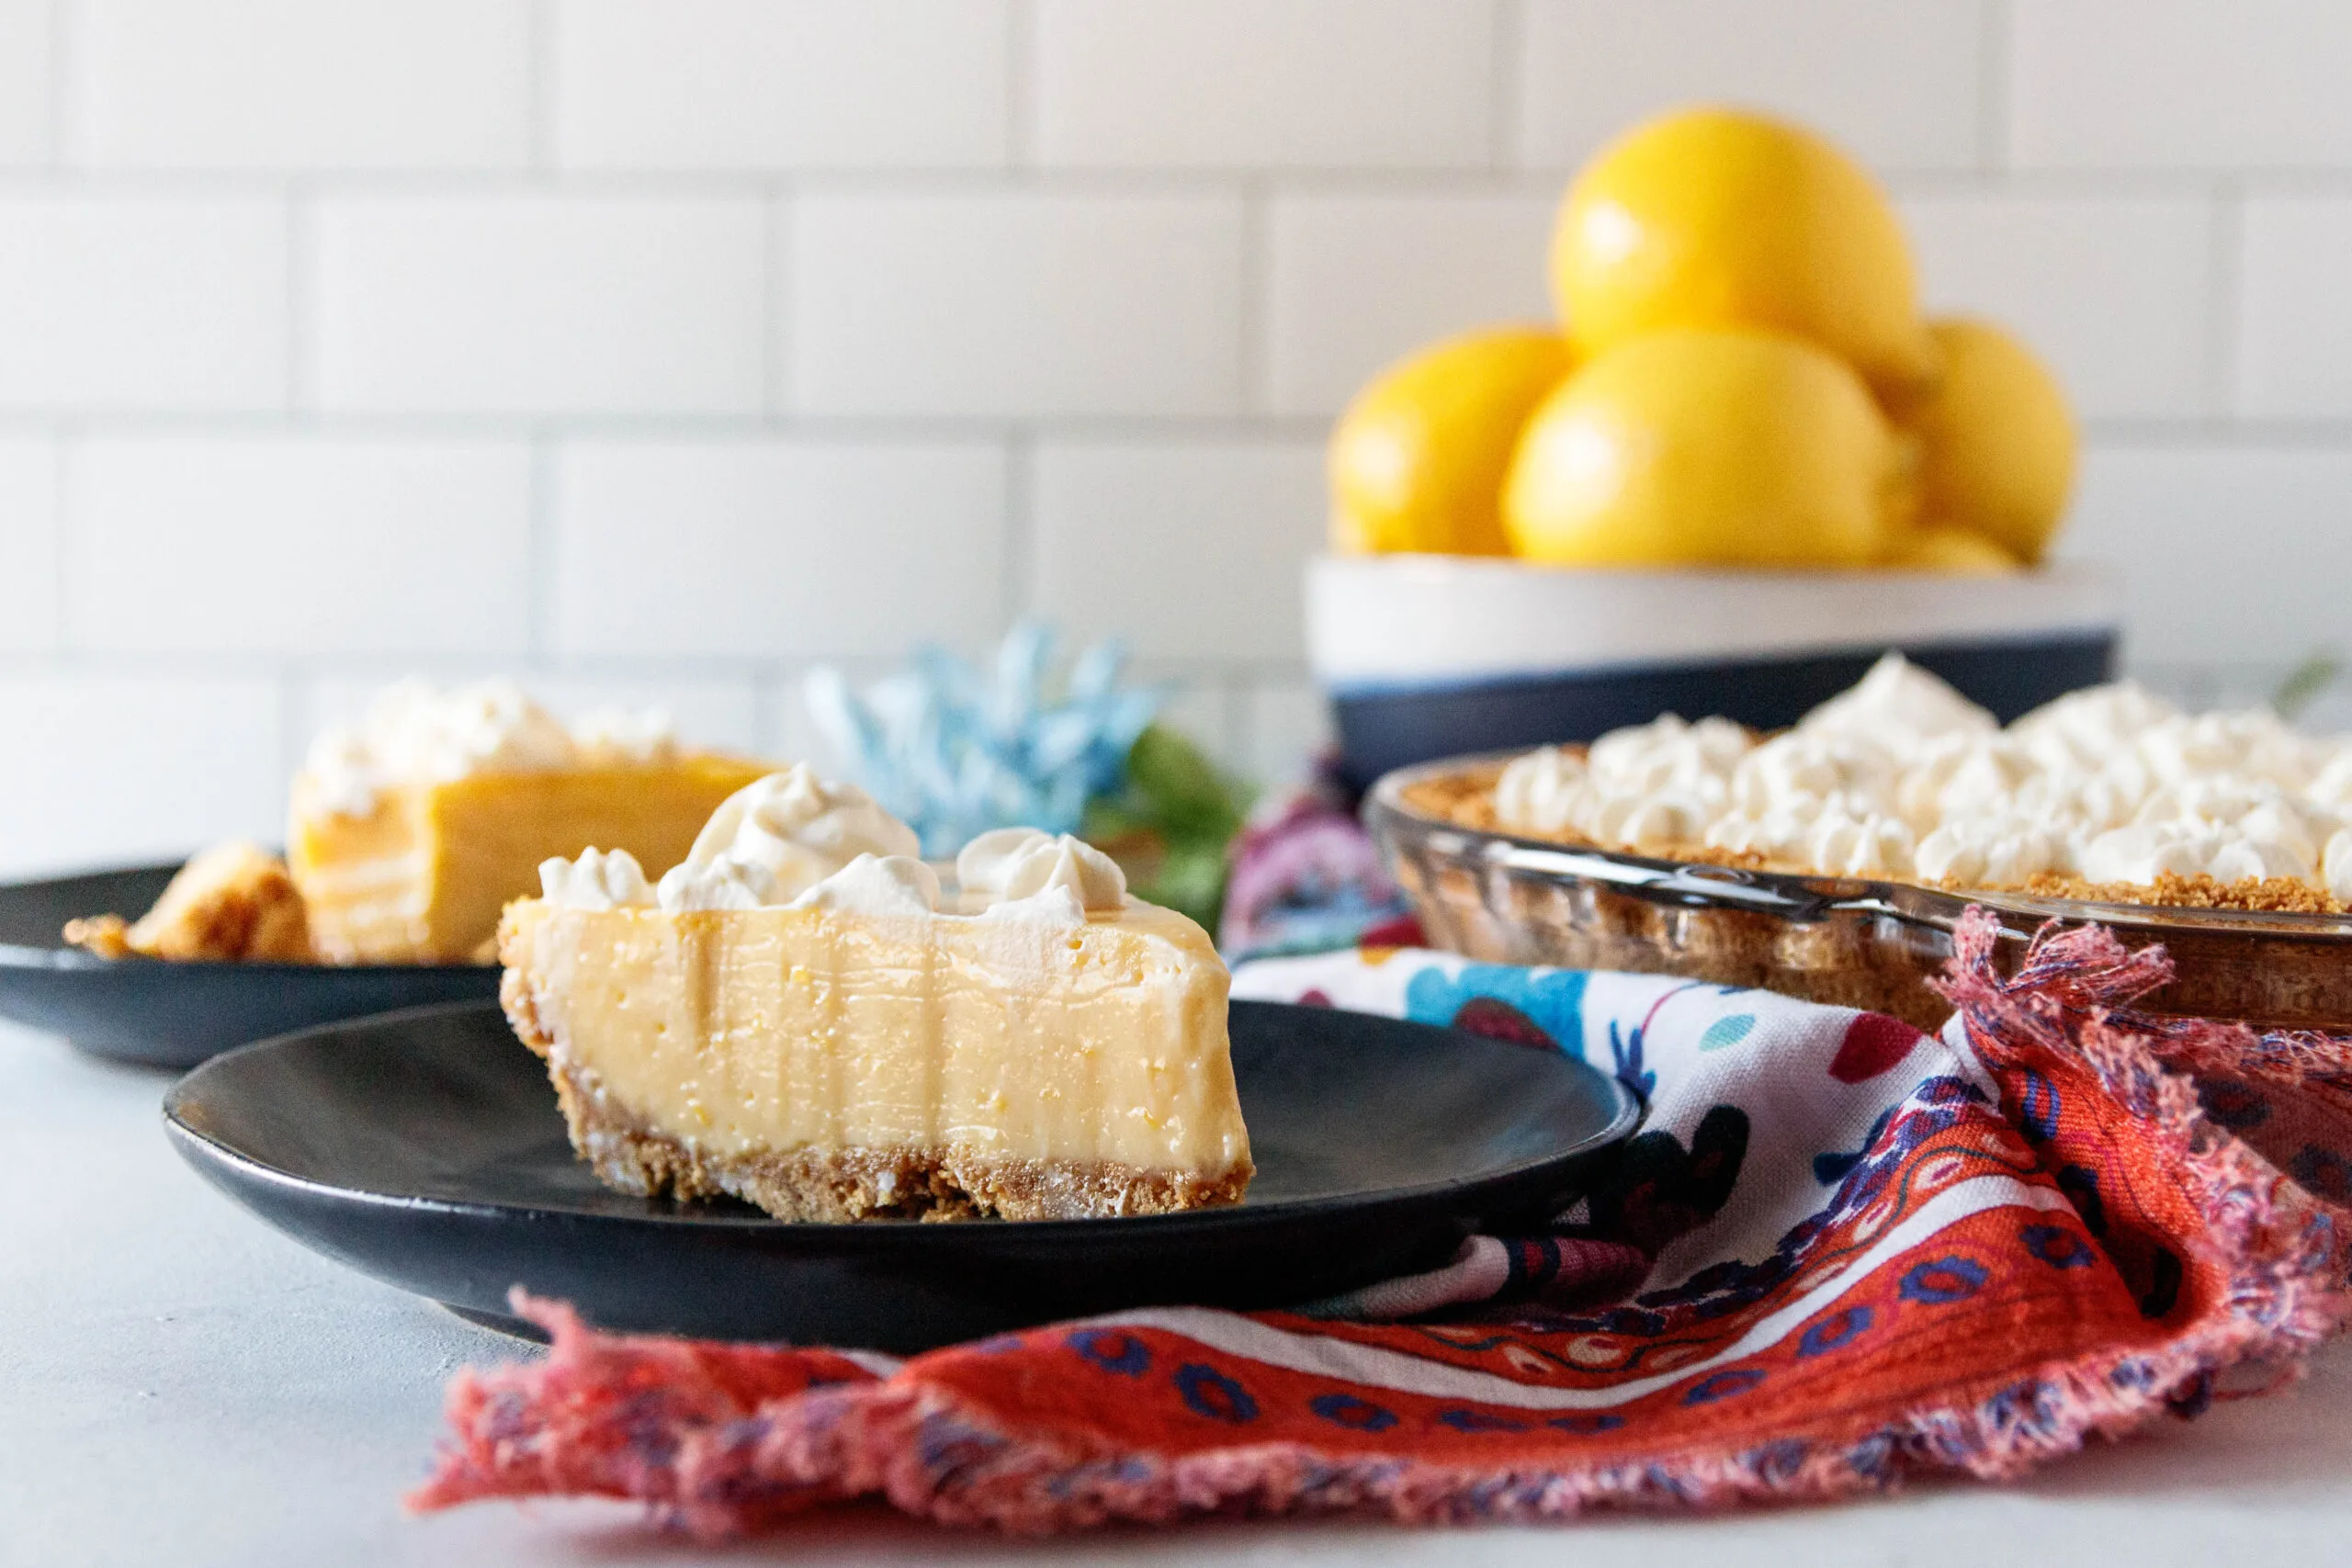 horizontal image showing a slice of lemon pie on a black plate with a bowl of lemons in the background